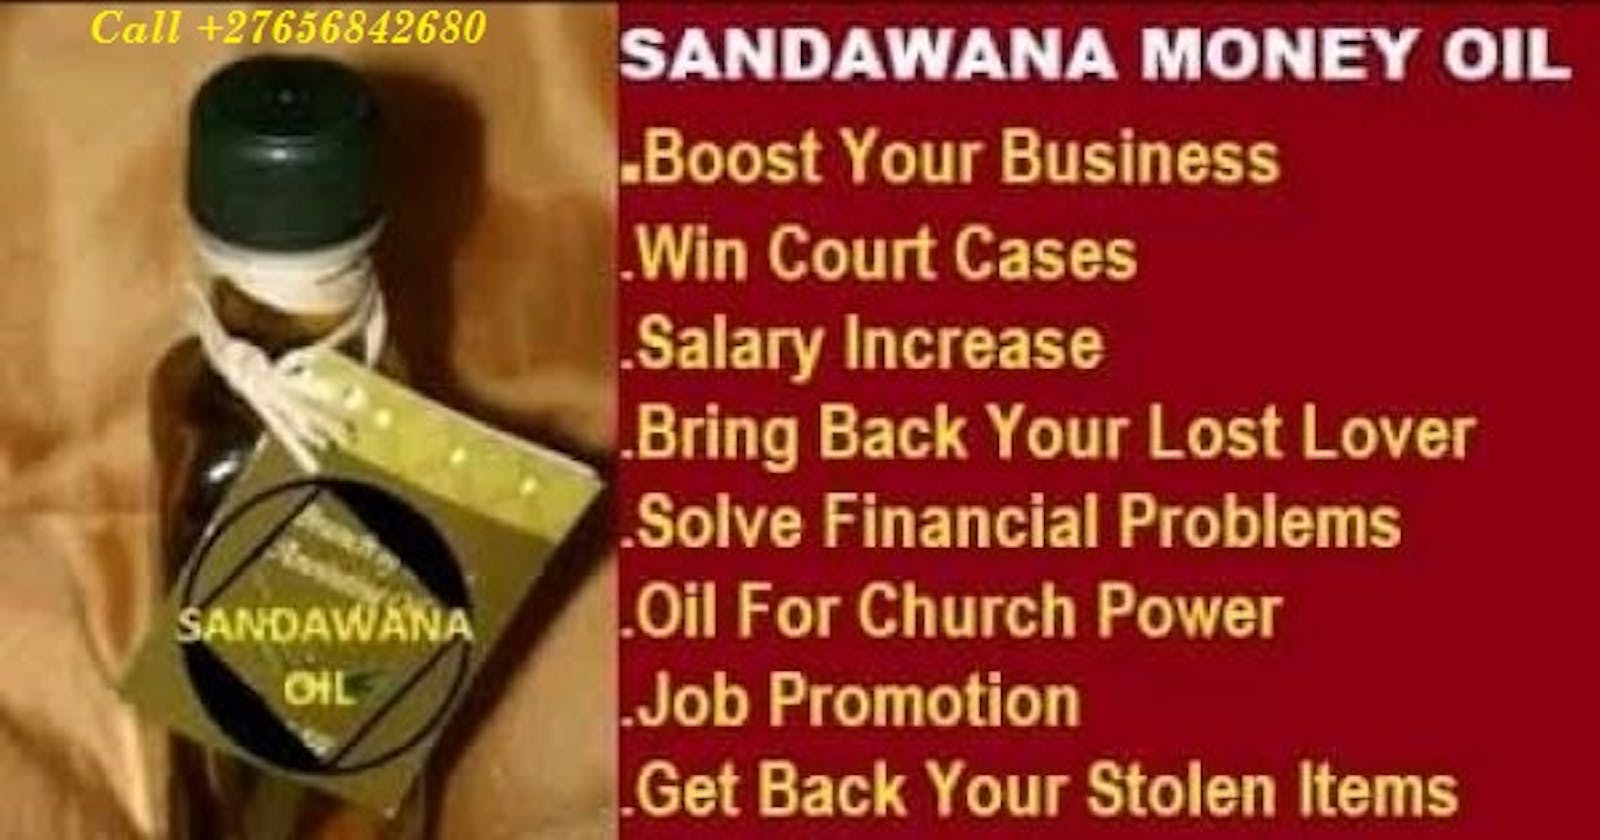 Sandawana Oil For  Money In Butterworth Town And Kroonstad Call ☏ +27656842680 Sandawana Oil For Bad Luck In Vryburg And Musina Town In South Africa